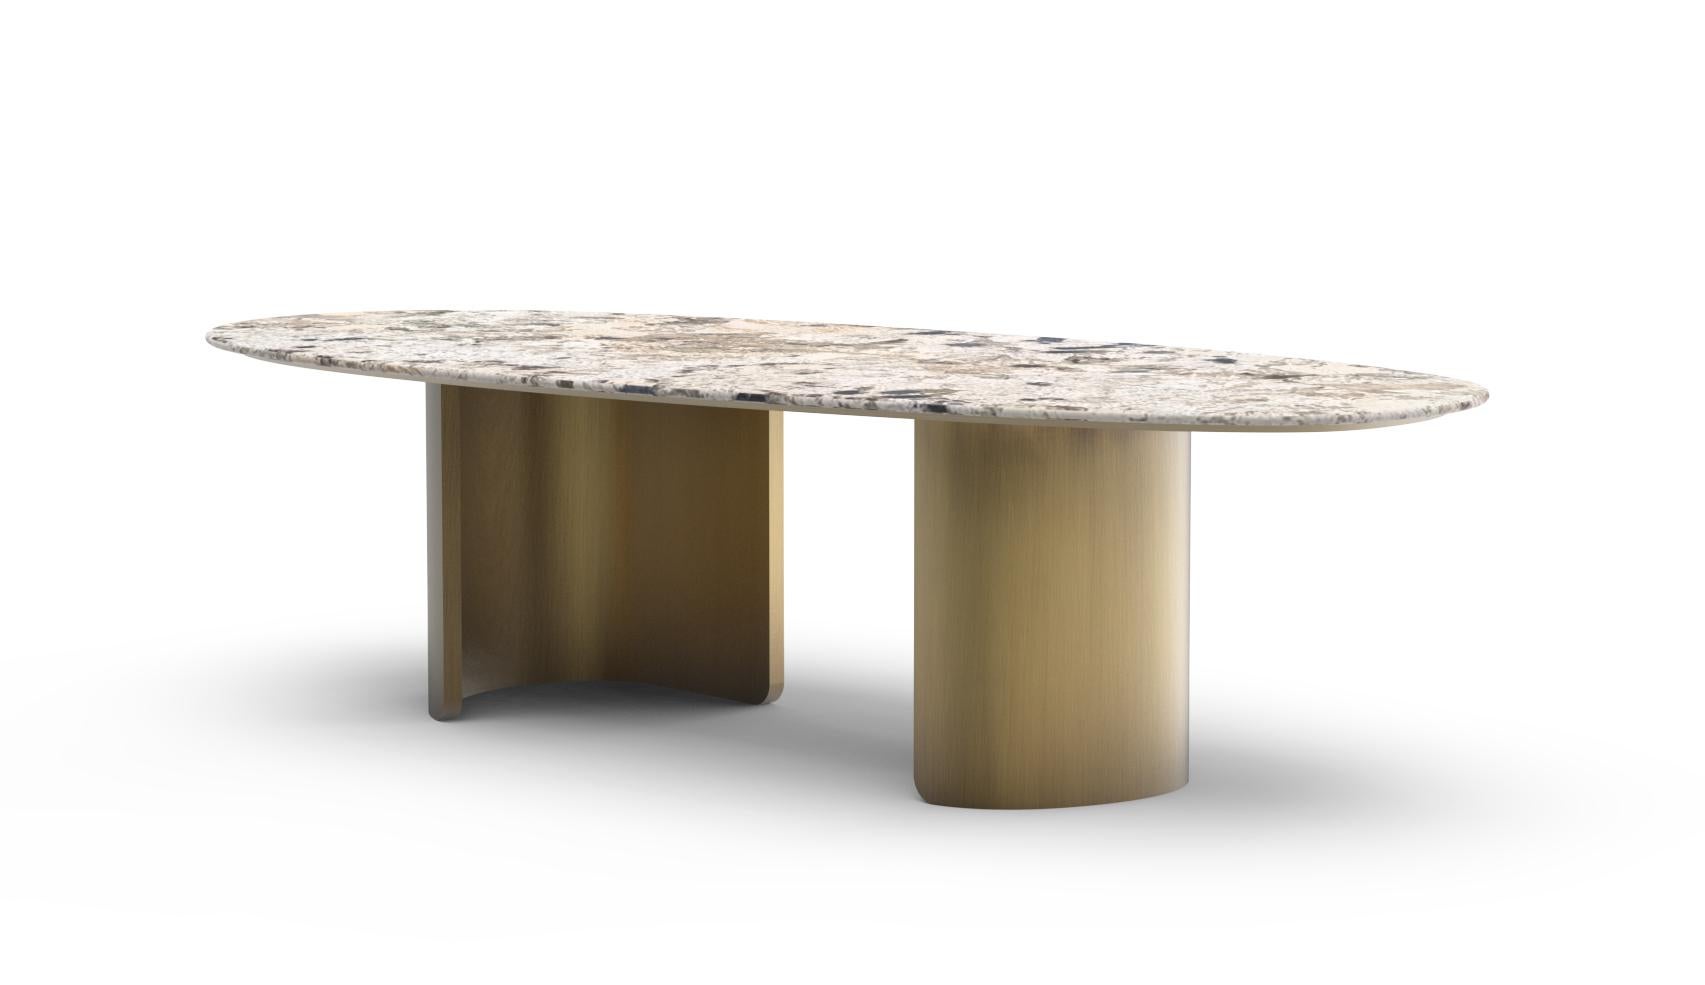 Portuguese Modern Armona Dining Table, Patagonia Stone, Handmade in Portugal by Greenapple For Sale